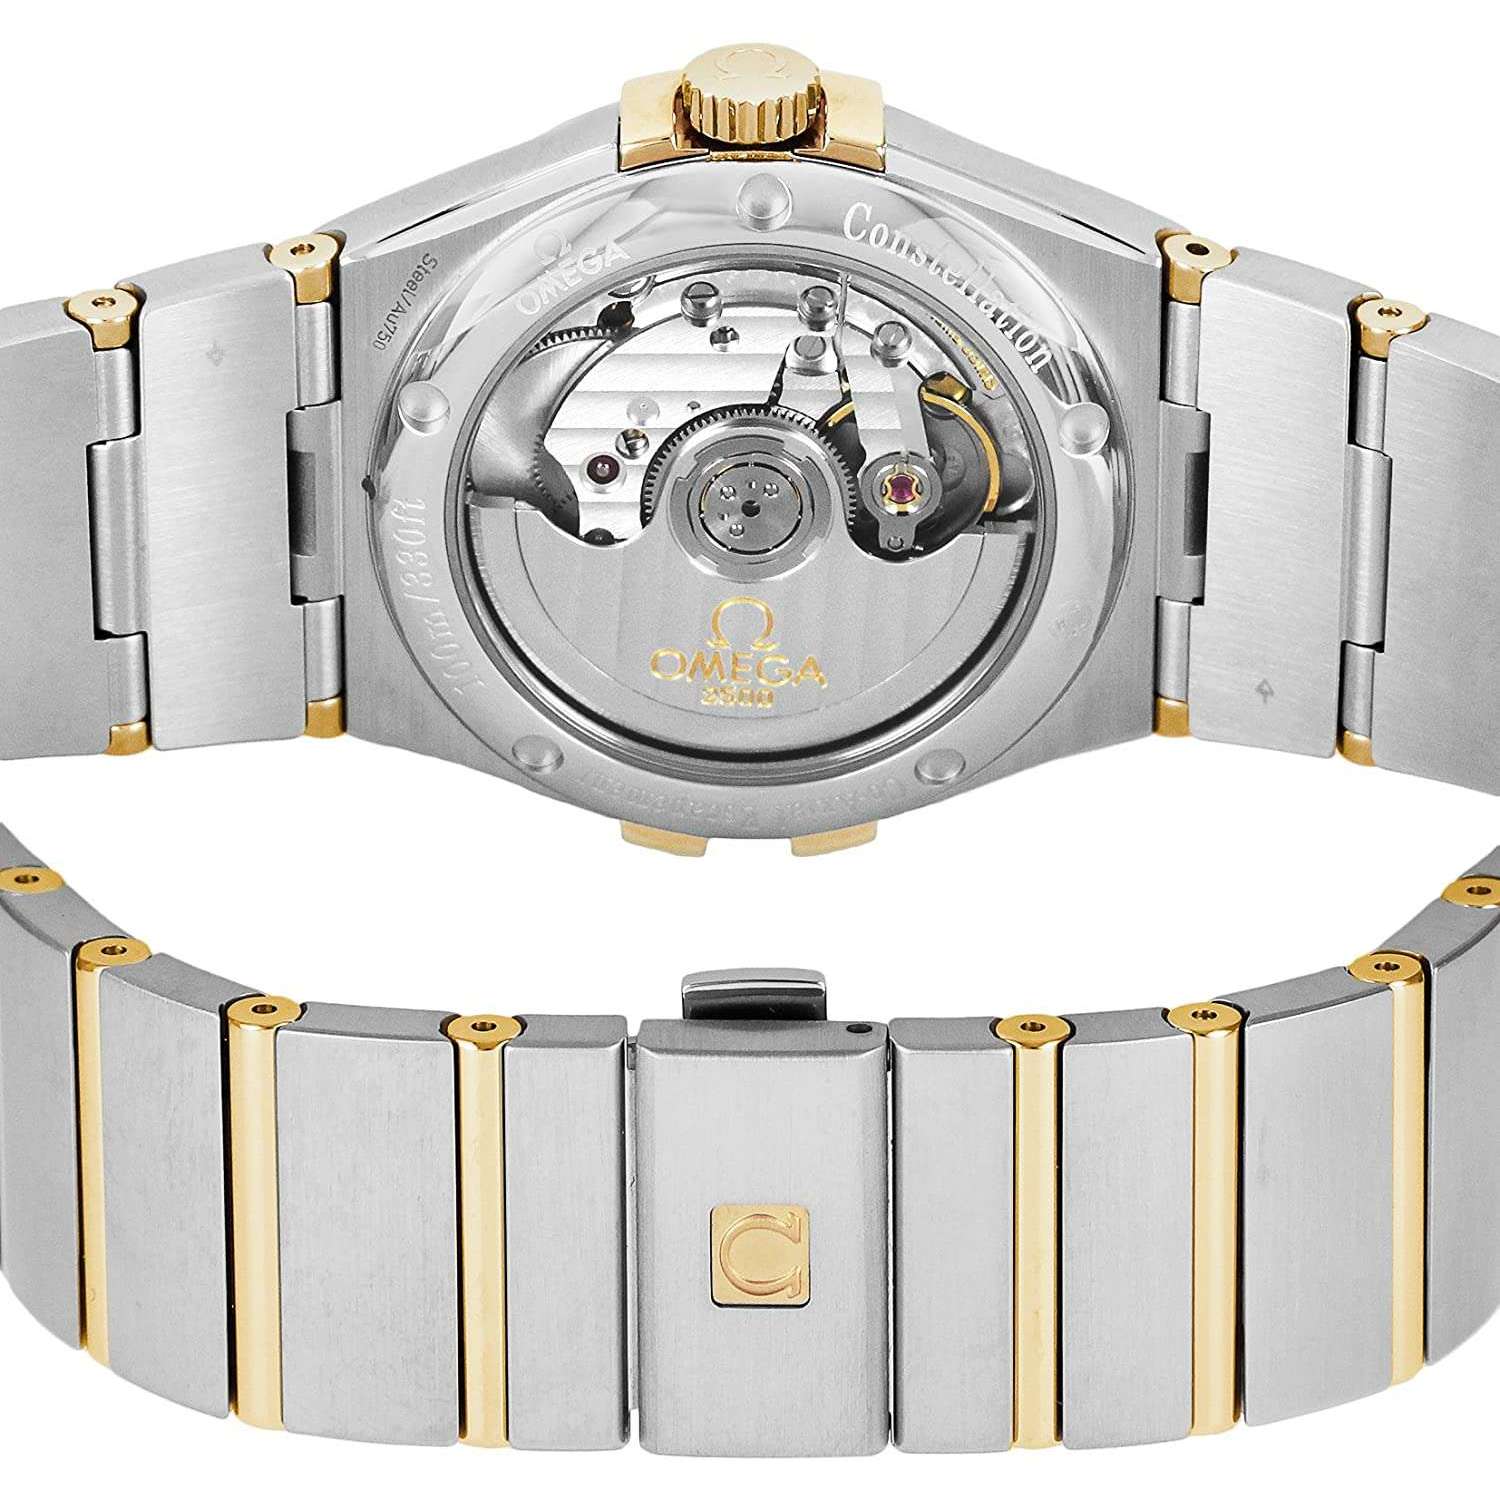 ROOK JAPAN:OMEGA CONSTELLATION CO-AXIAL CHRONOMETER 34.5 MM MEN WATCH 123.20.35.20.02.002,Luxury Watch,Omega